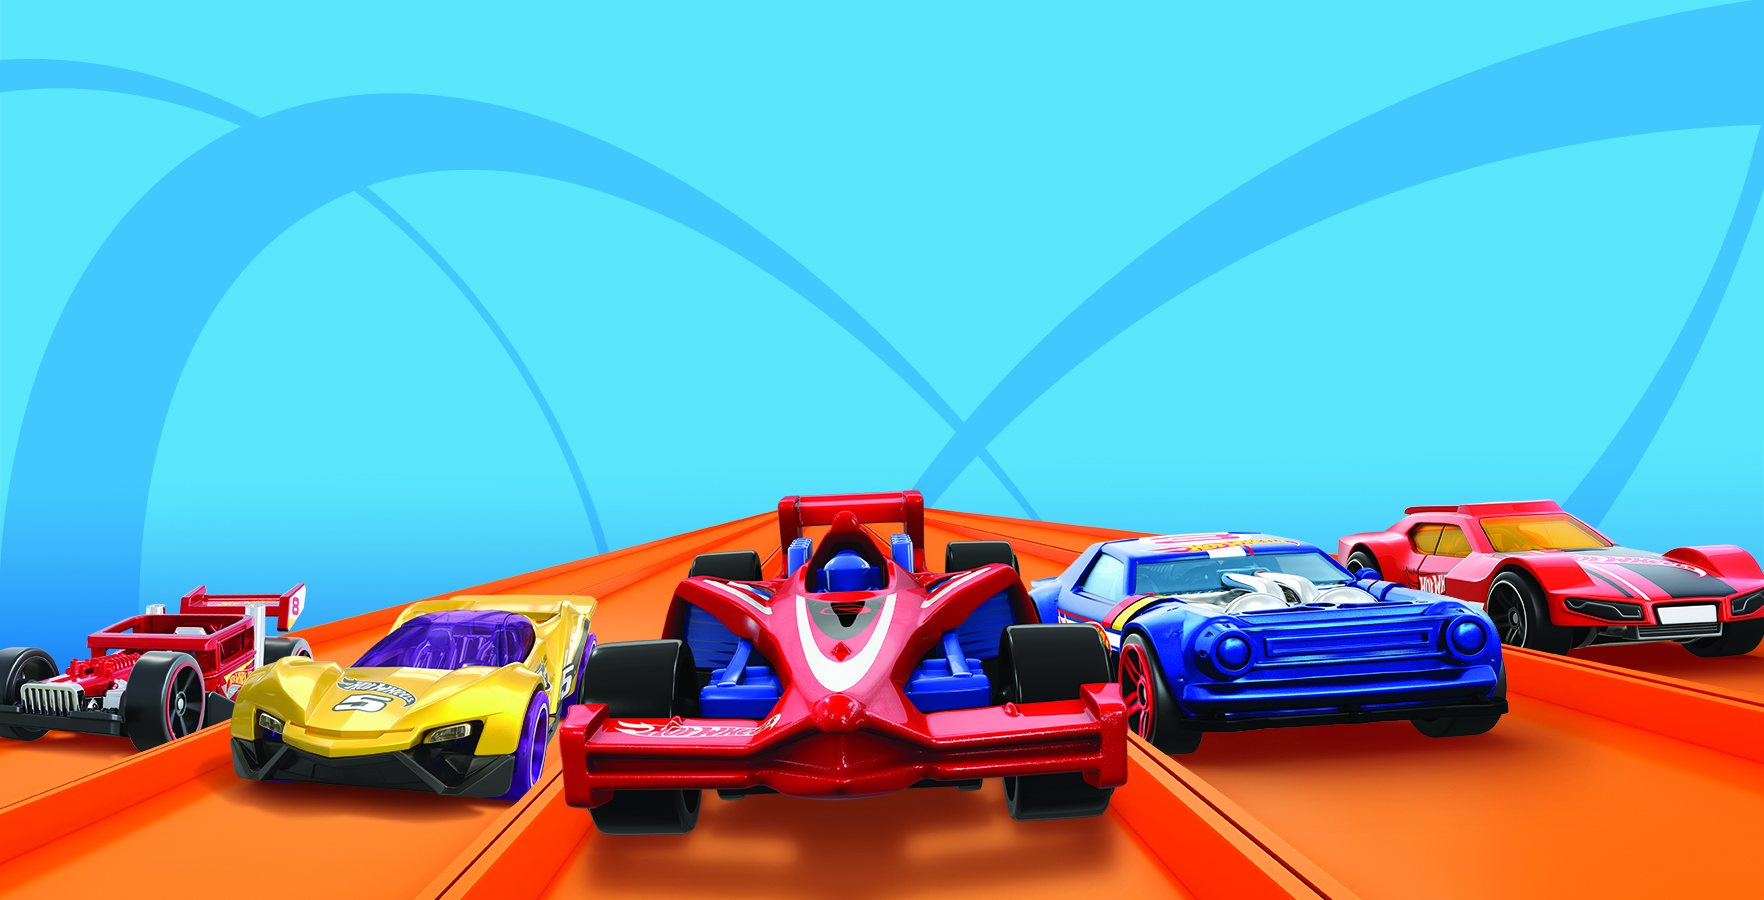 Buckle up and Race to the National Corvette Museum with the Most Famous Toy Vehicles on the Planet, Hot Wheels®